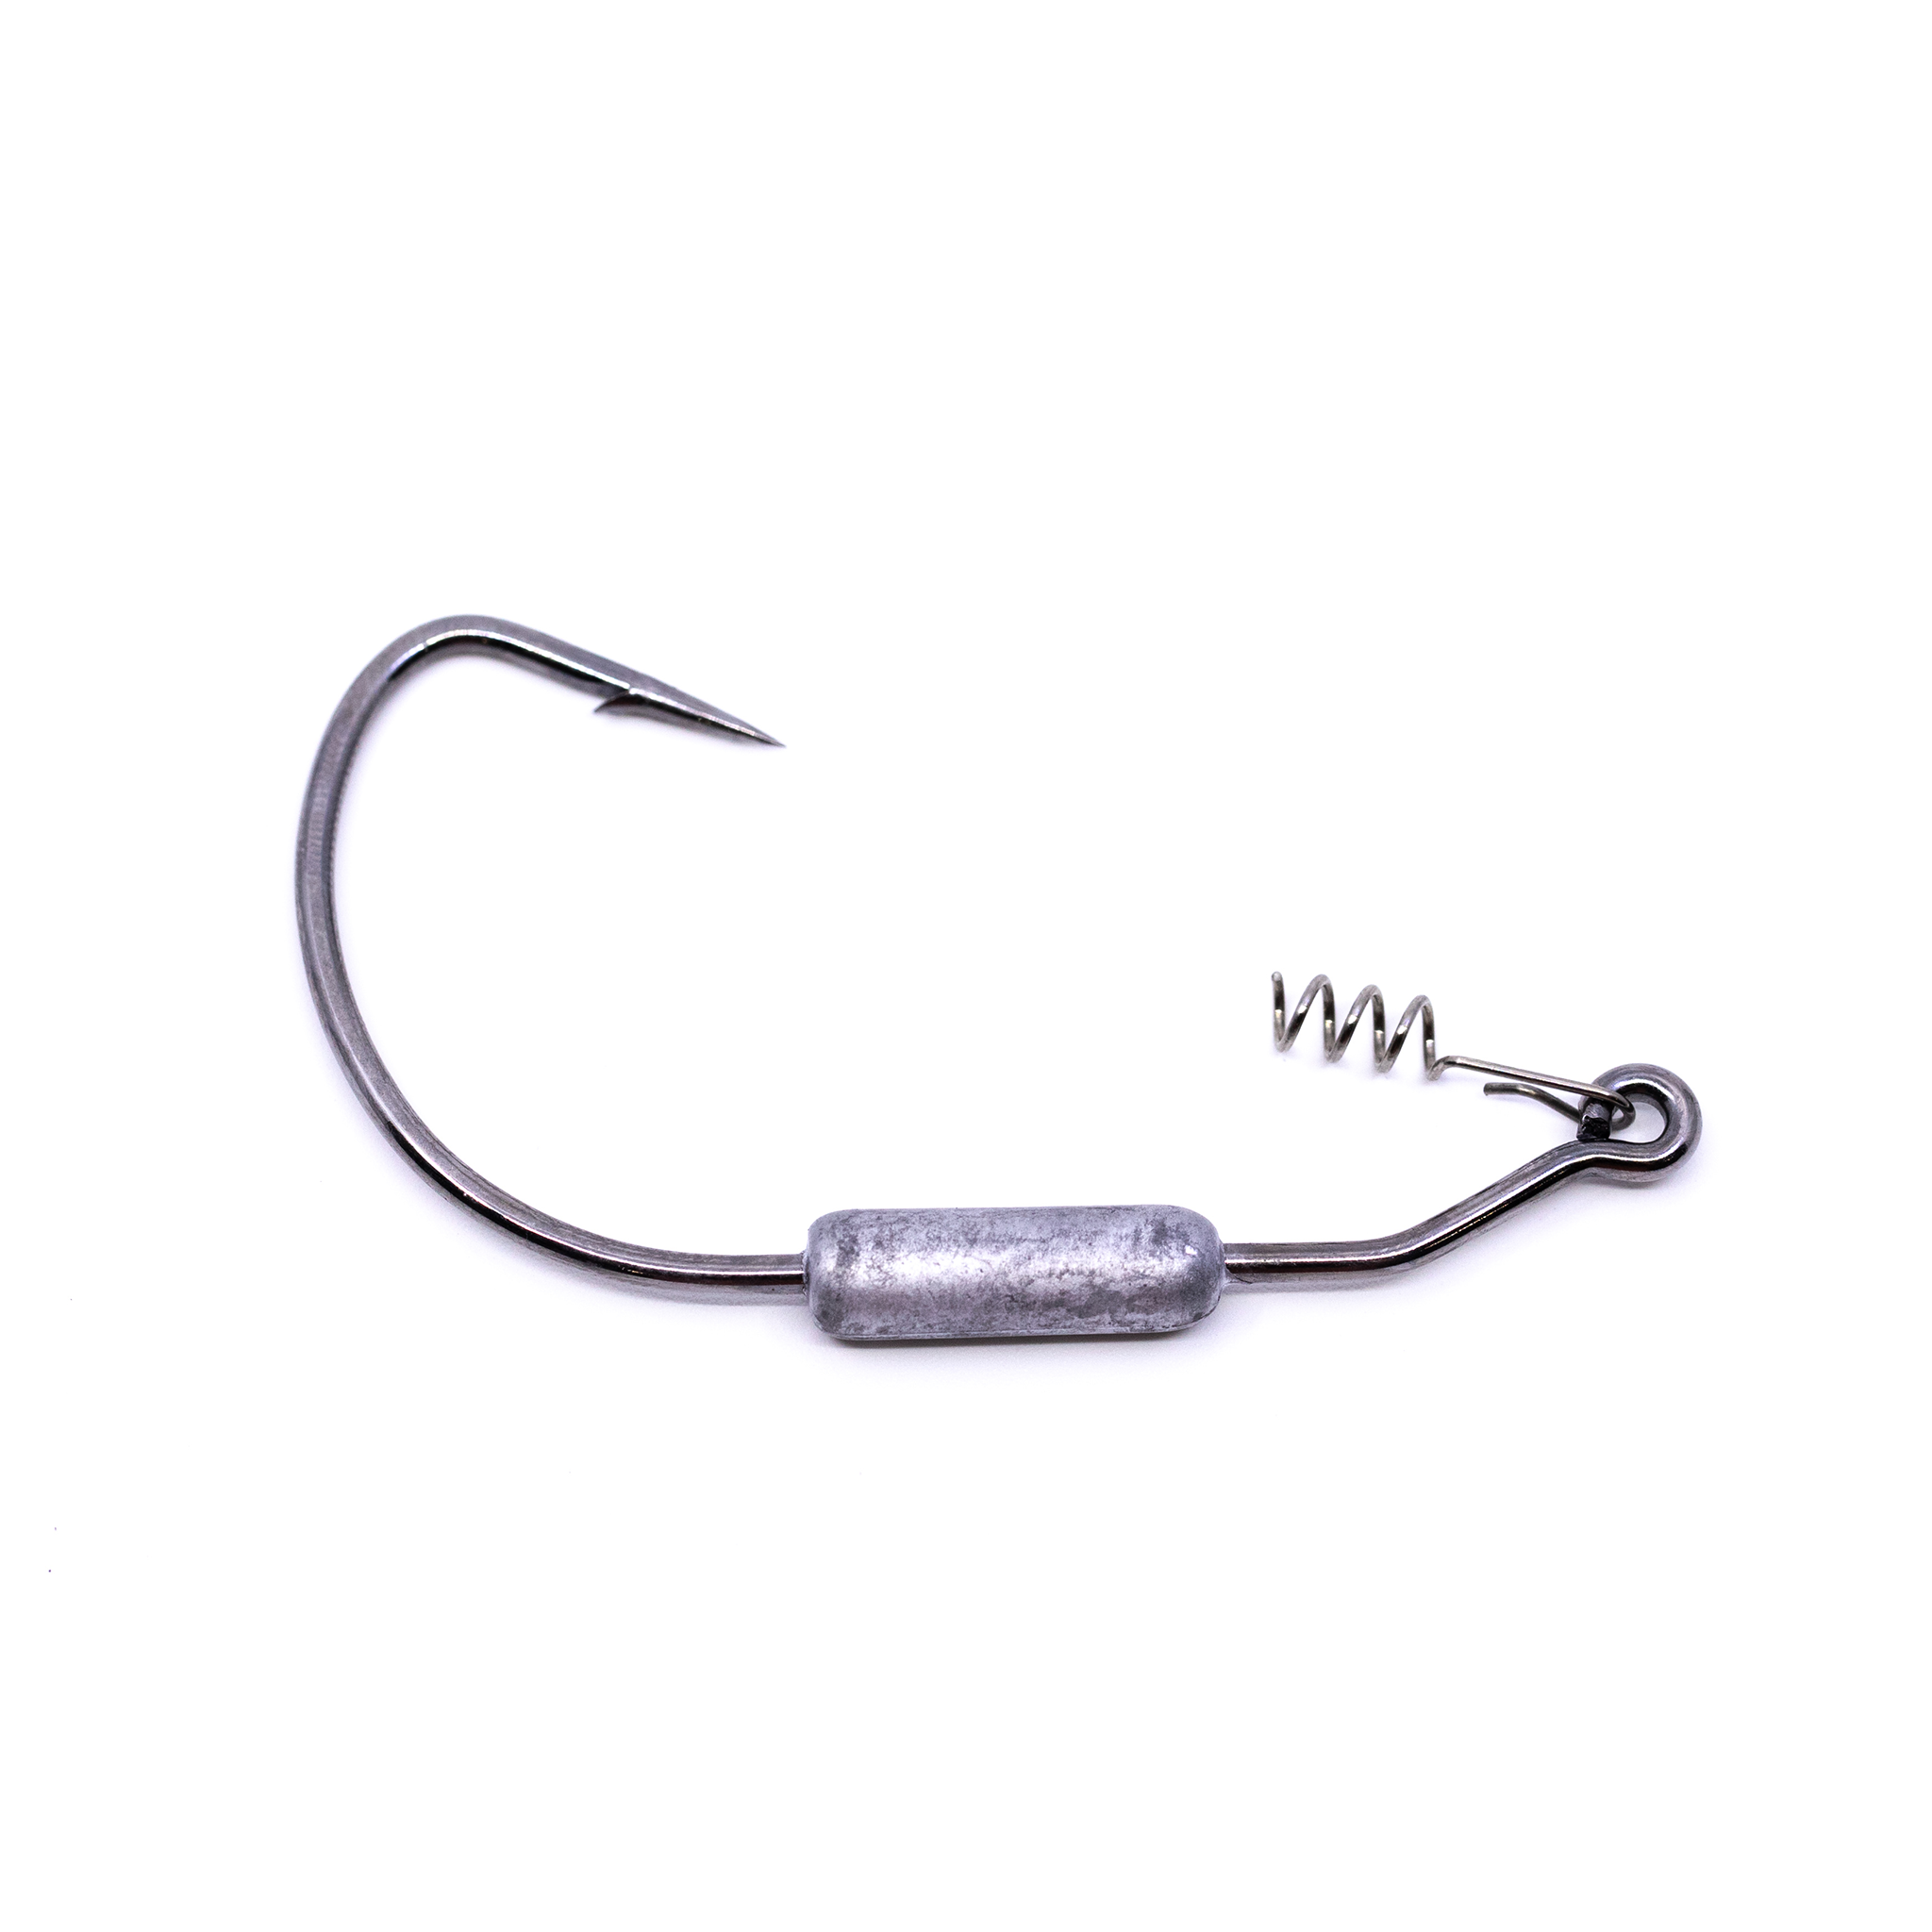 Googan Baits Saucy Swimmer 2.8 Electric Shad 9pack